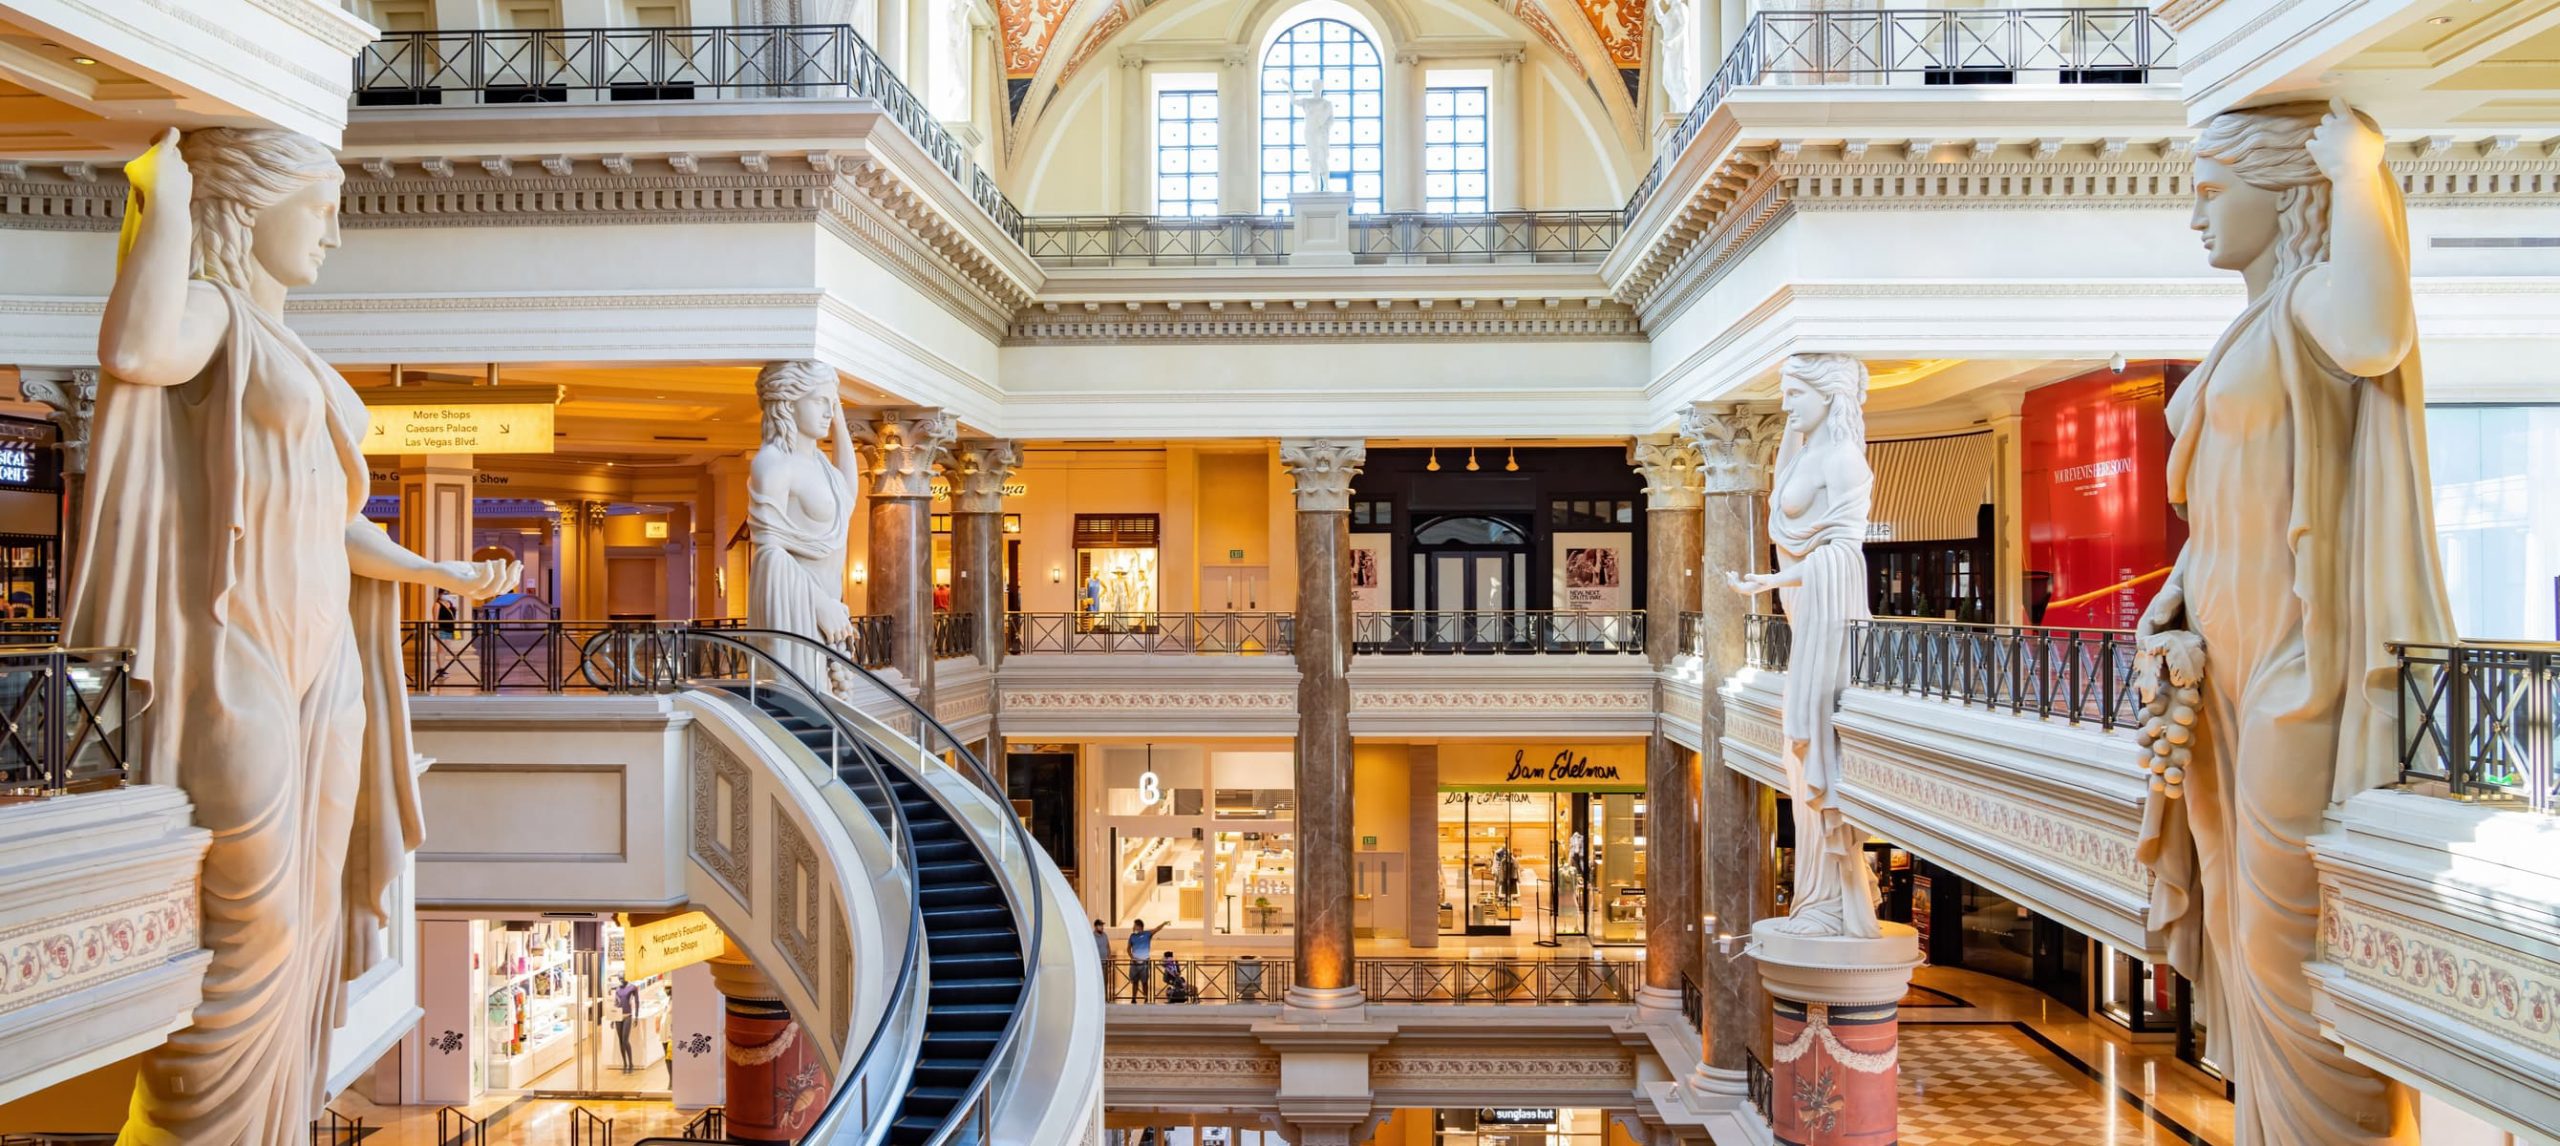 The 9 Best Places To Go Shopping in Las Vegas